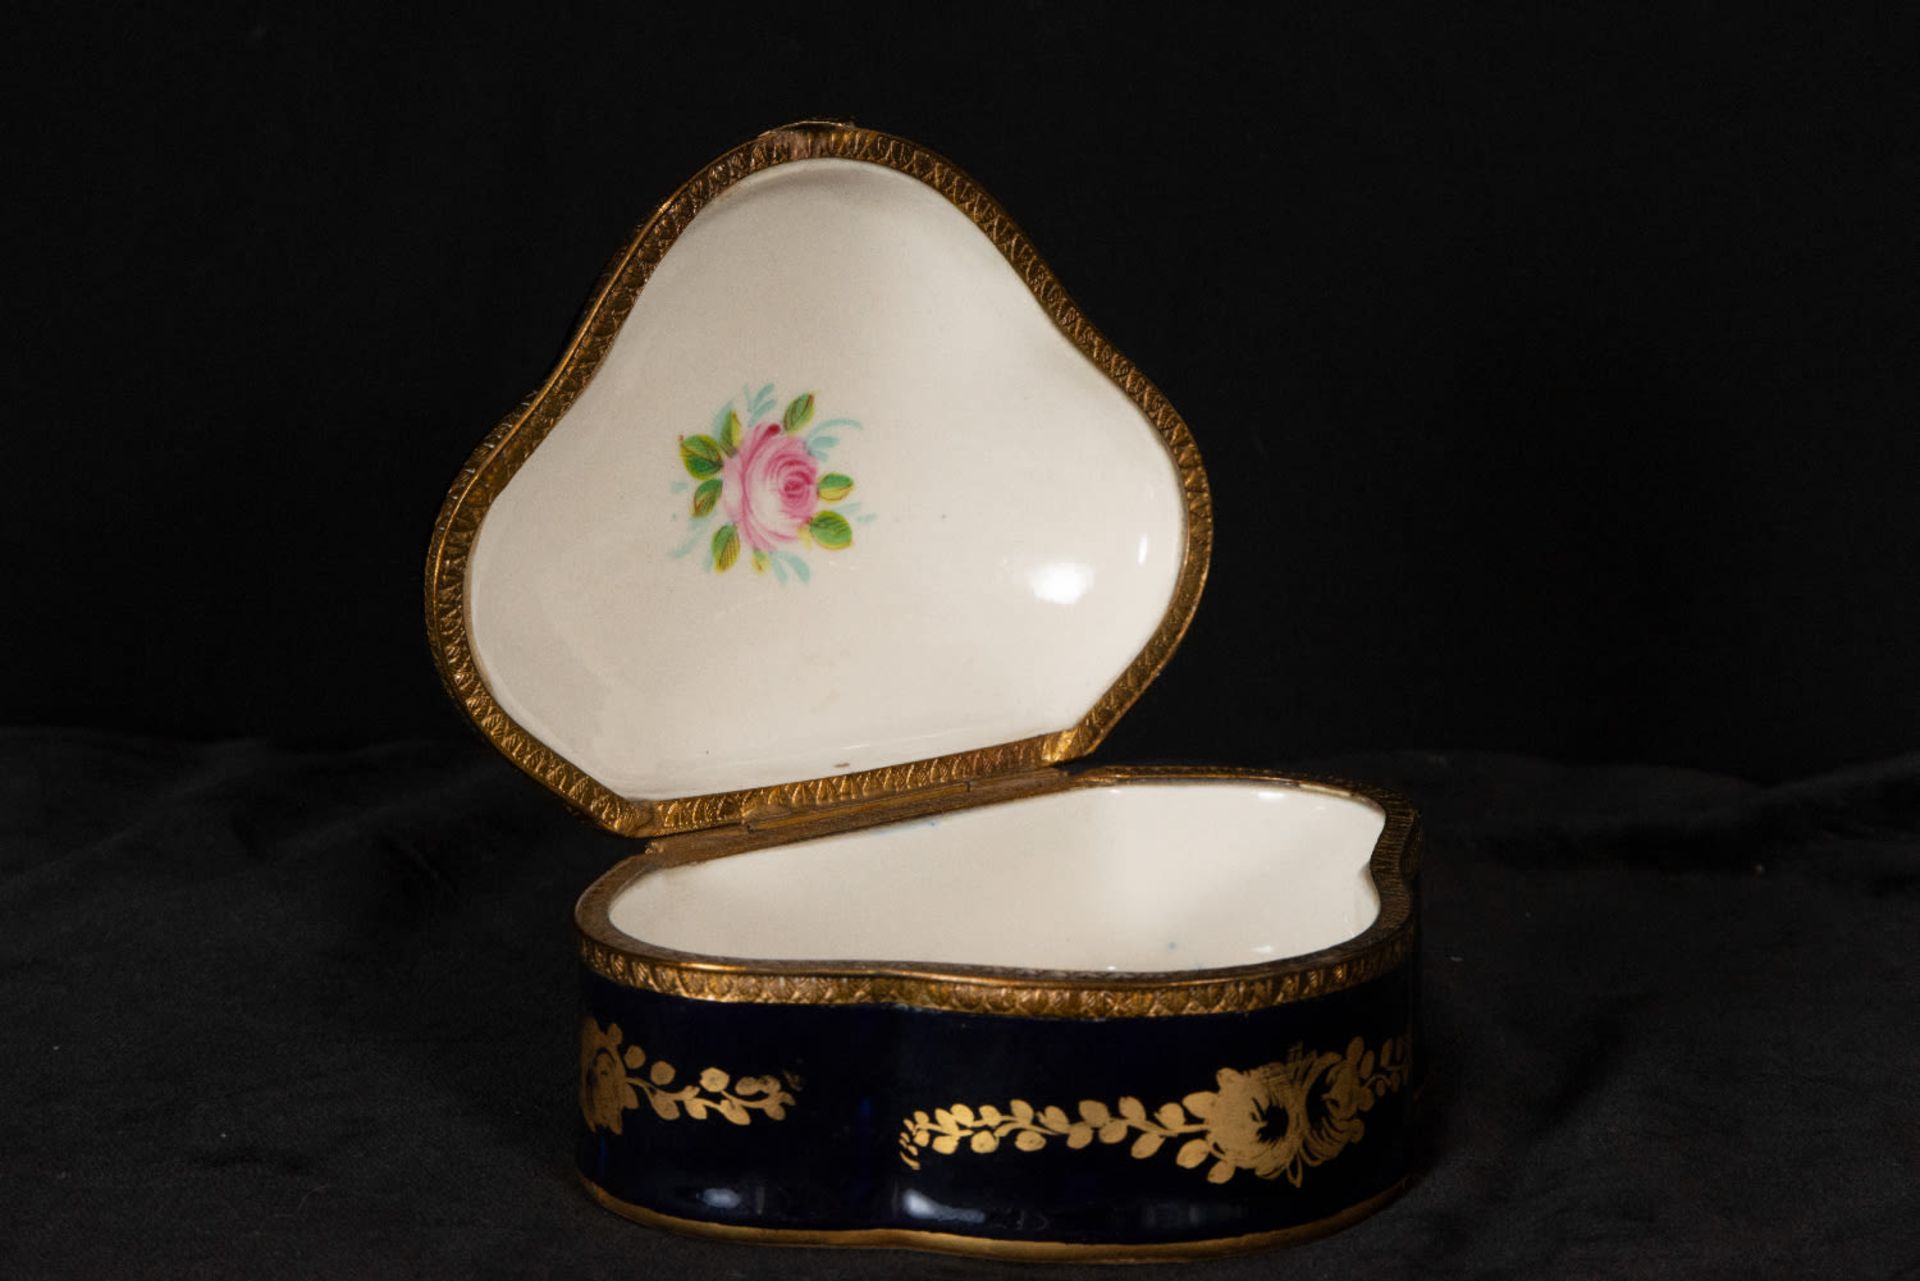 Pair of Sèvres porcelain dressing table jewelry boxes and porcelain swan, 19th century - Image 4 of 10